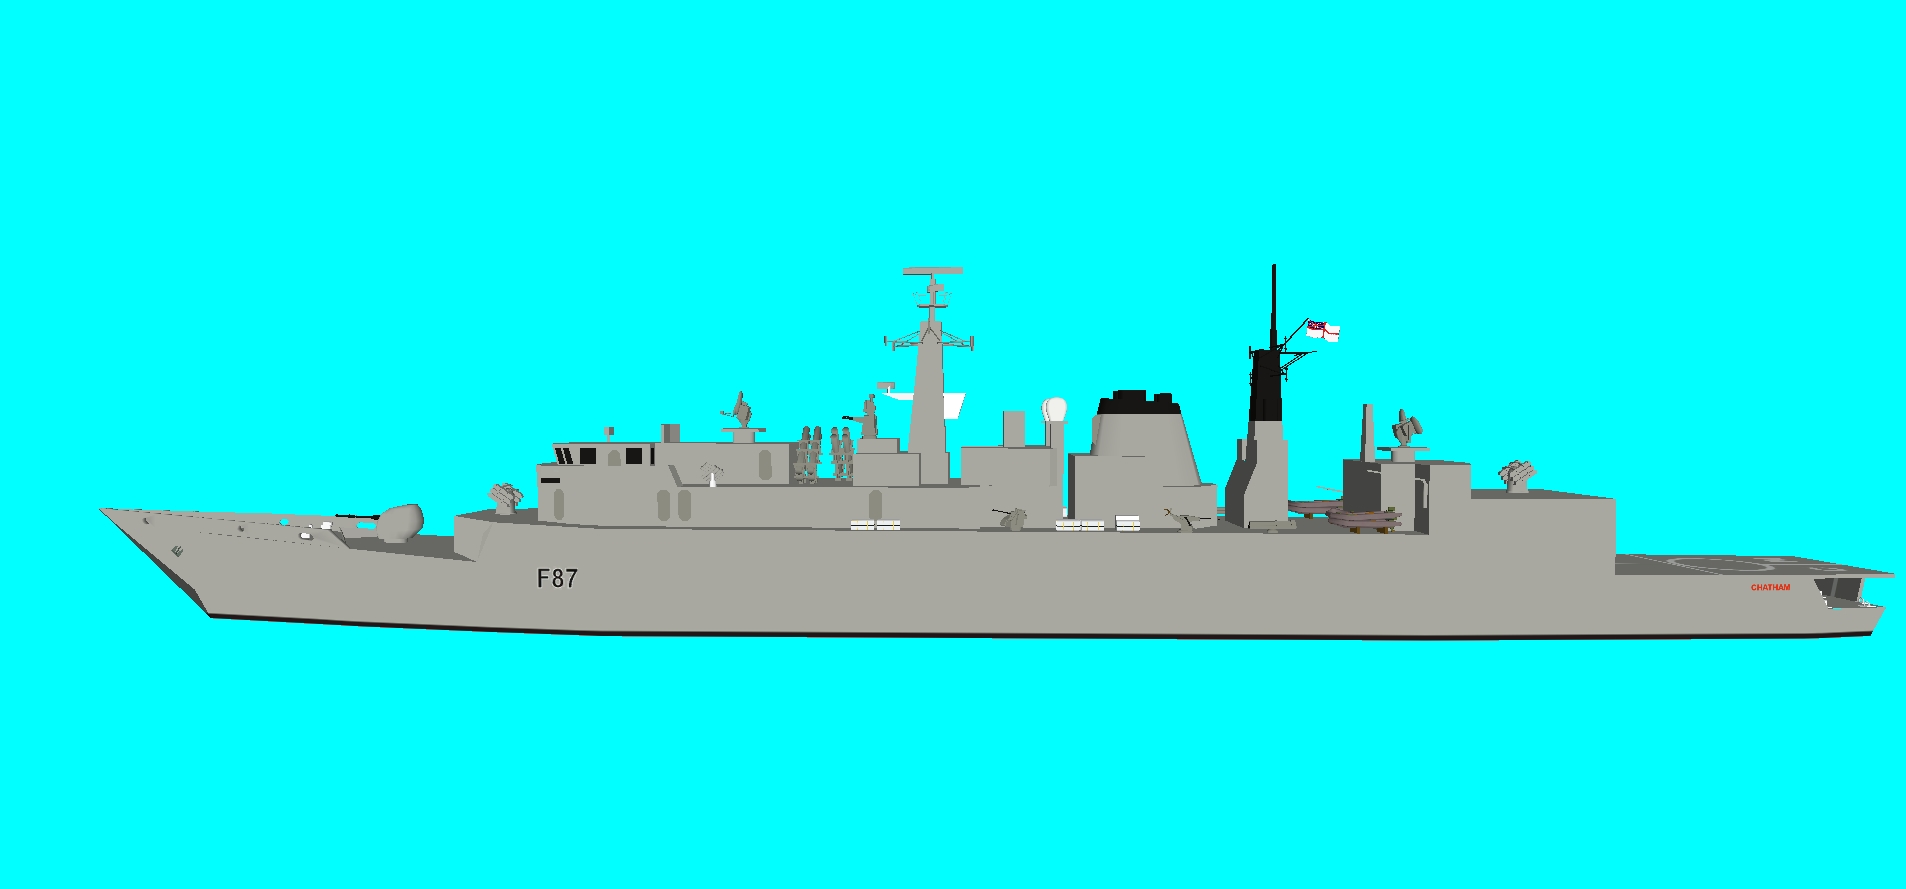 HMS Chatham (F87); a Batch 3 vessel, with 4.5in gun in lieu of Exocet, 20mm Oerlikon, twin 30mm Oerlikon, Goalkeeper CIWS, and triple torpedo tubes.